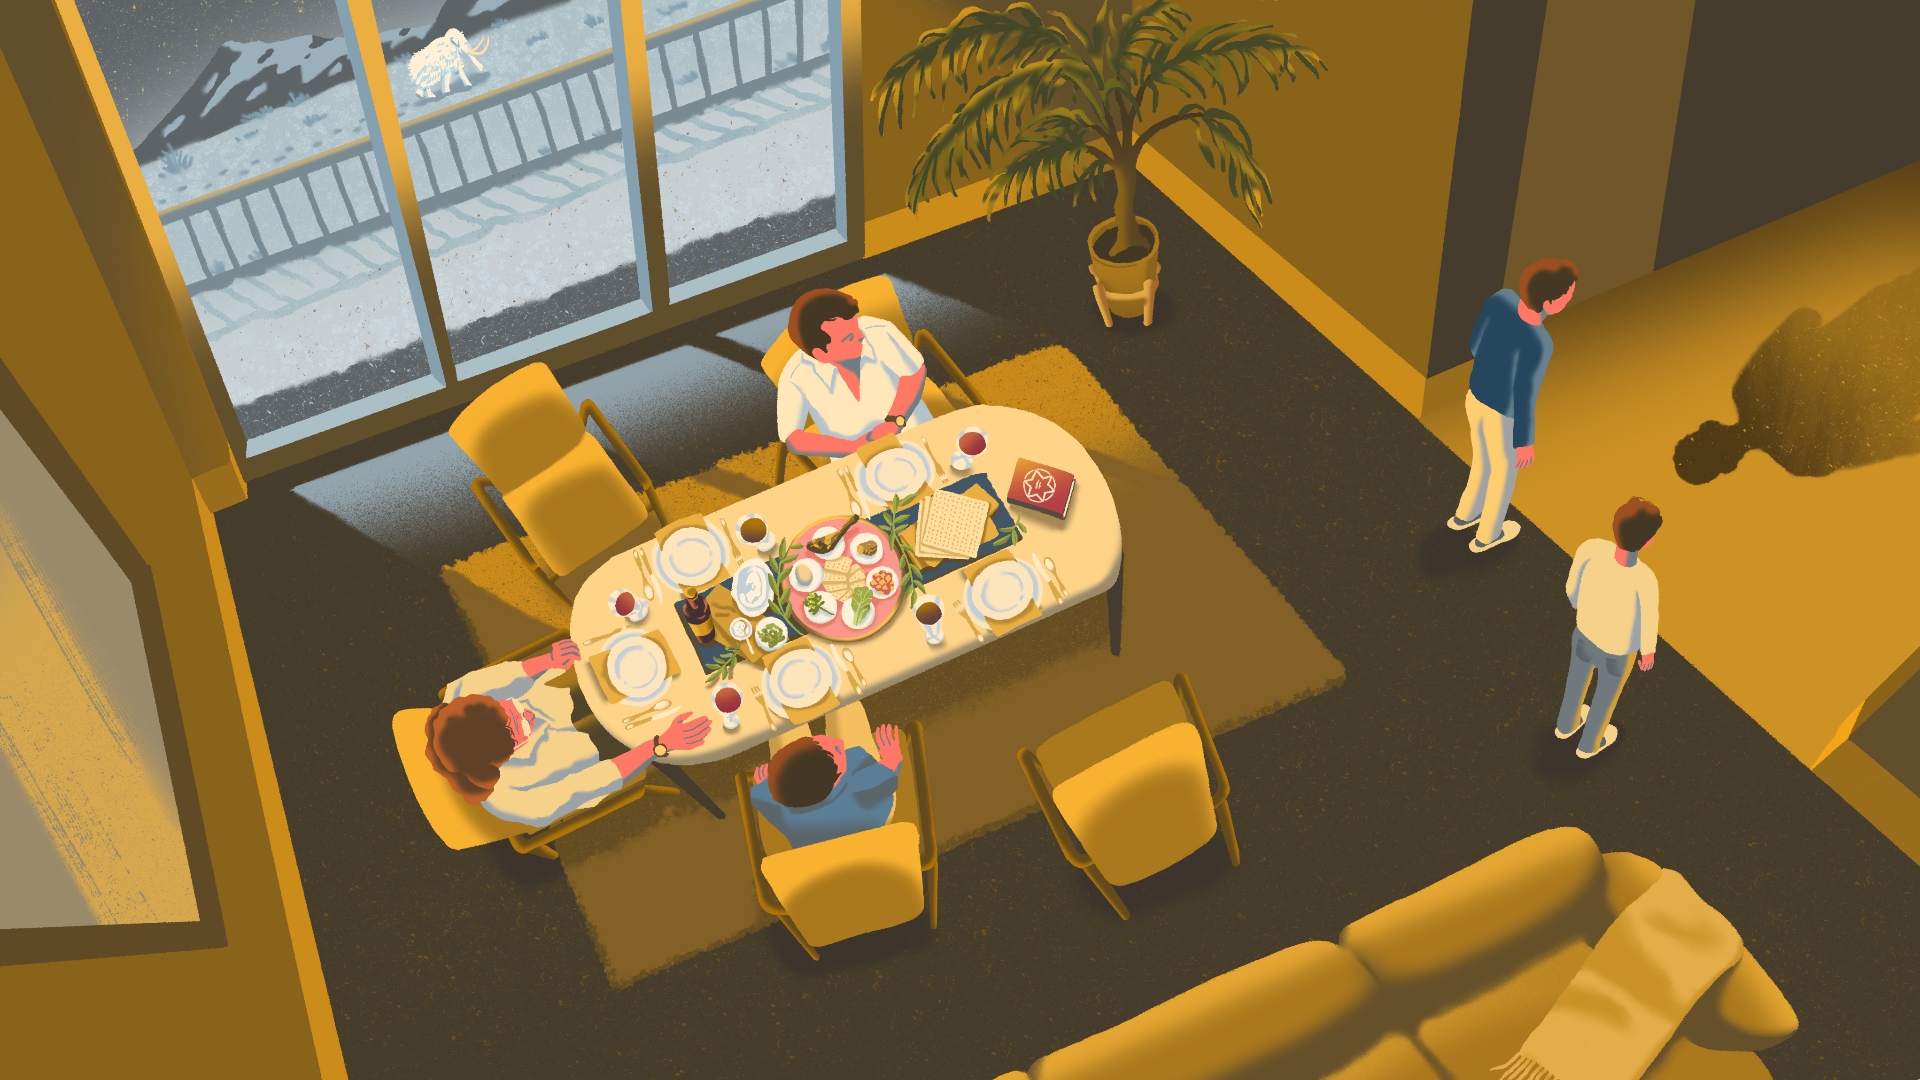 Illustration looking down on a table set for a traditional Passover seder with people seated around it. A shadow at the edge of the illustration indicates someone is about to enter the room.